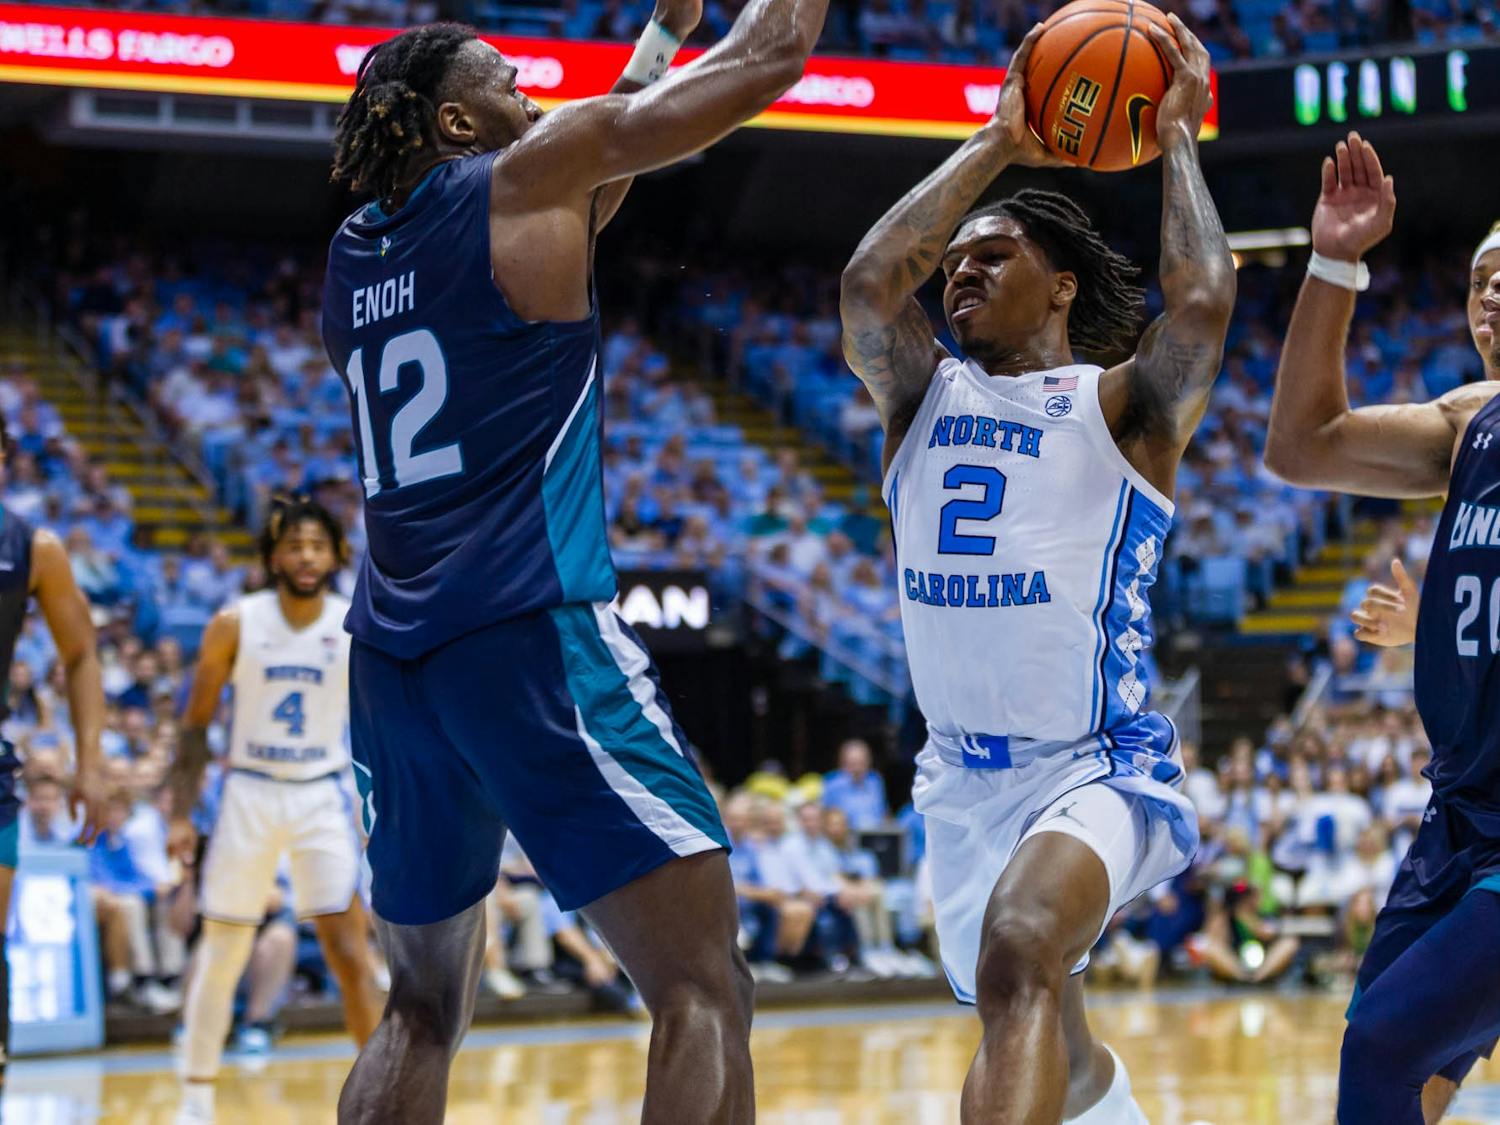 UNC junior guard Caleb Love (2) guards the ball during the men's basketball game against UNCW ain the Dean Smith Center on Monday, Nov. 7, 2022.